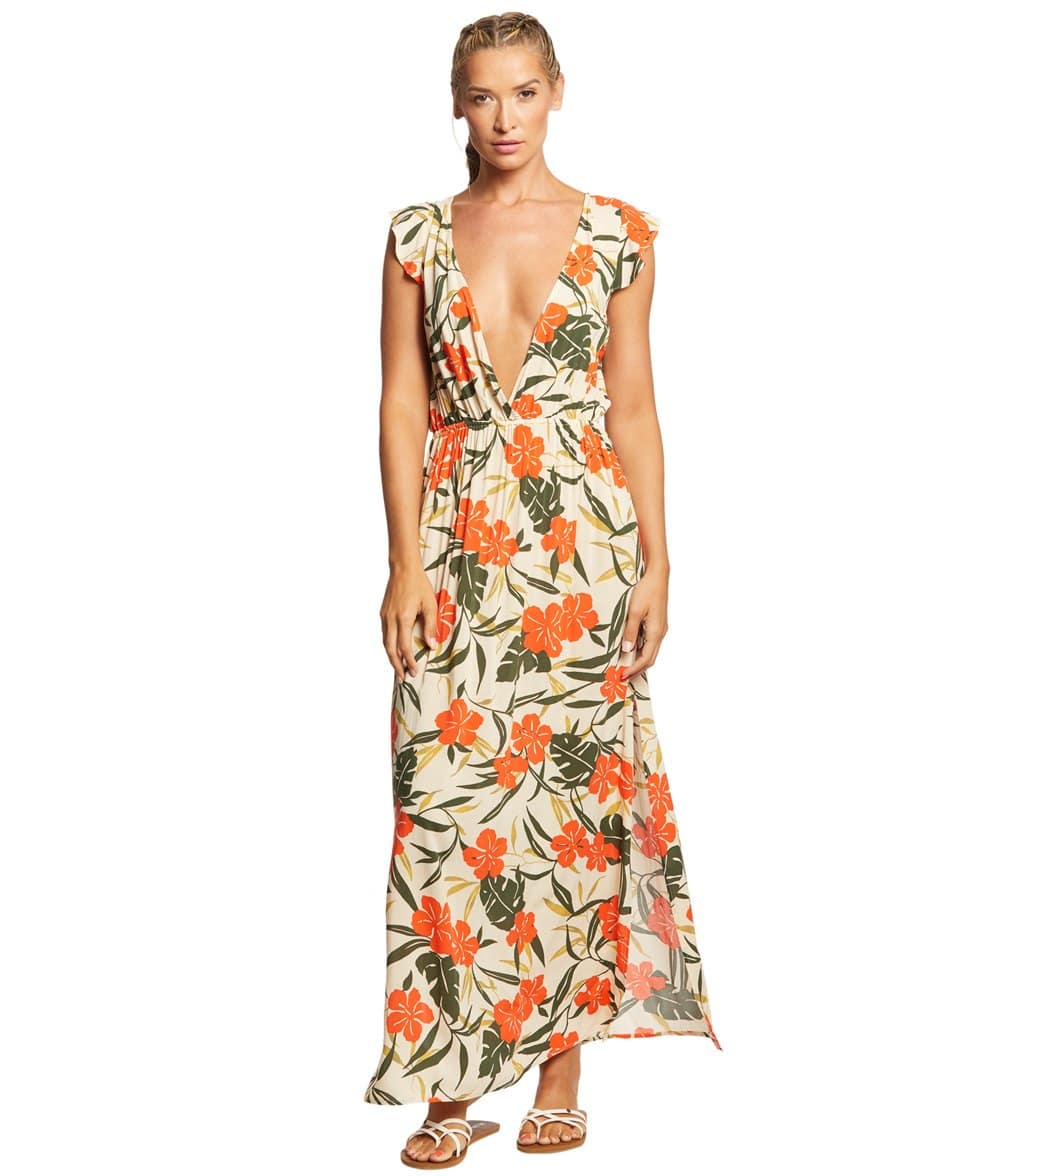 Vince Camuto Tropical Bloom Cover Up Dress at SwimOutlet.com